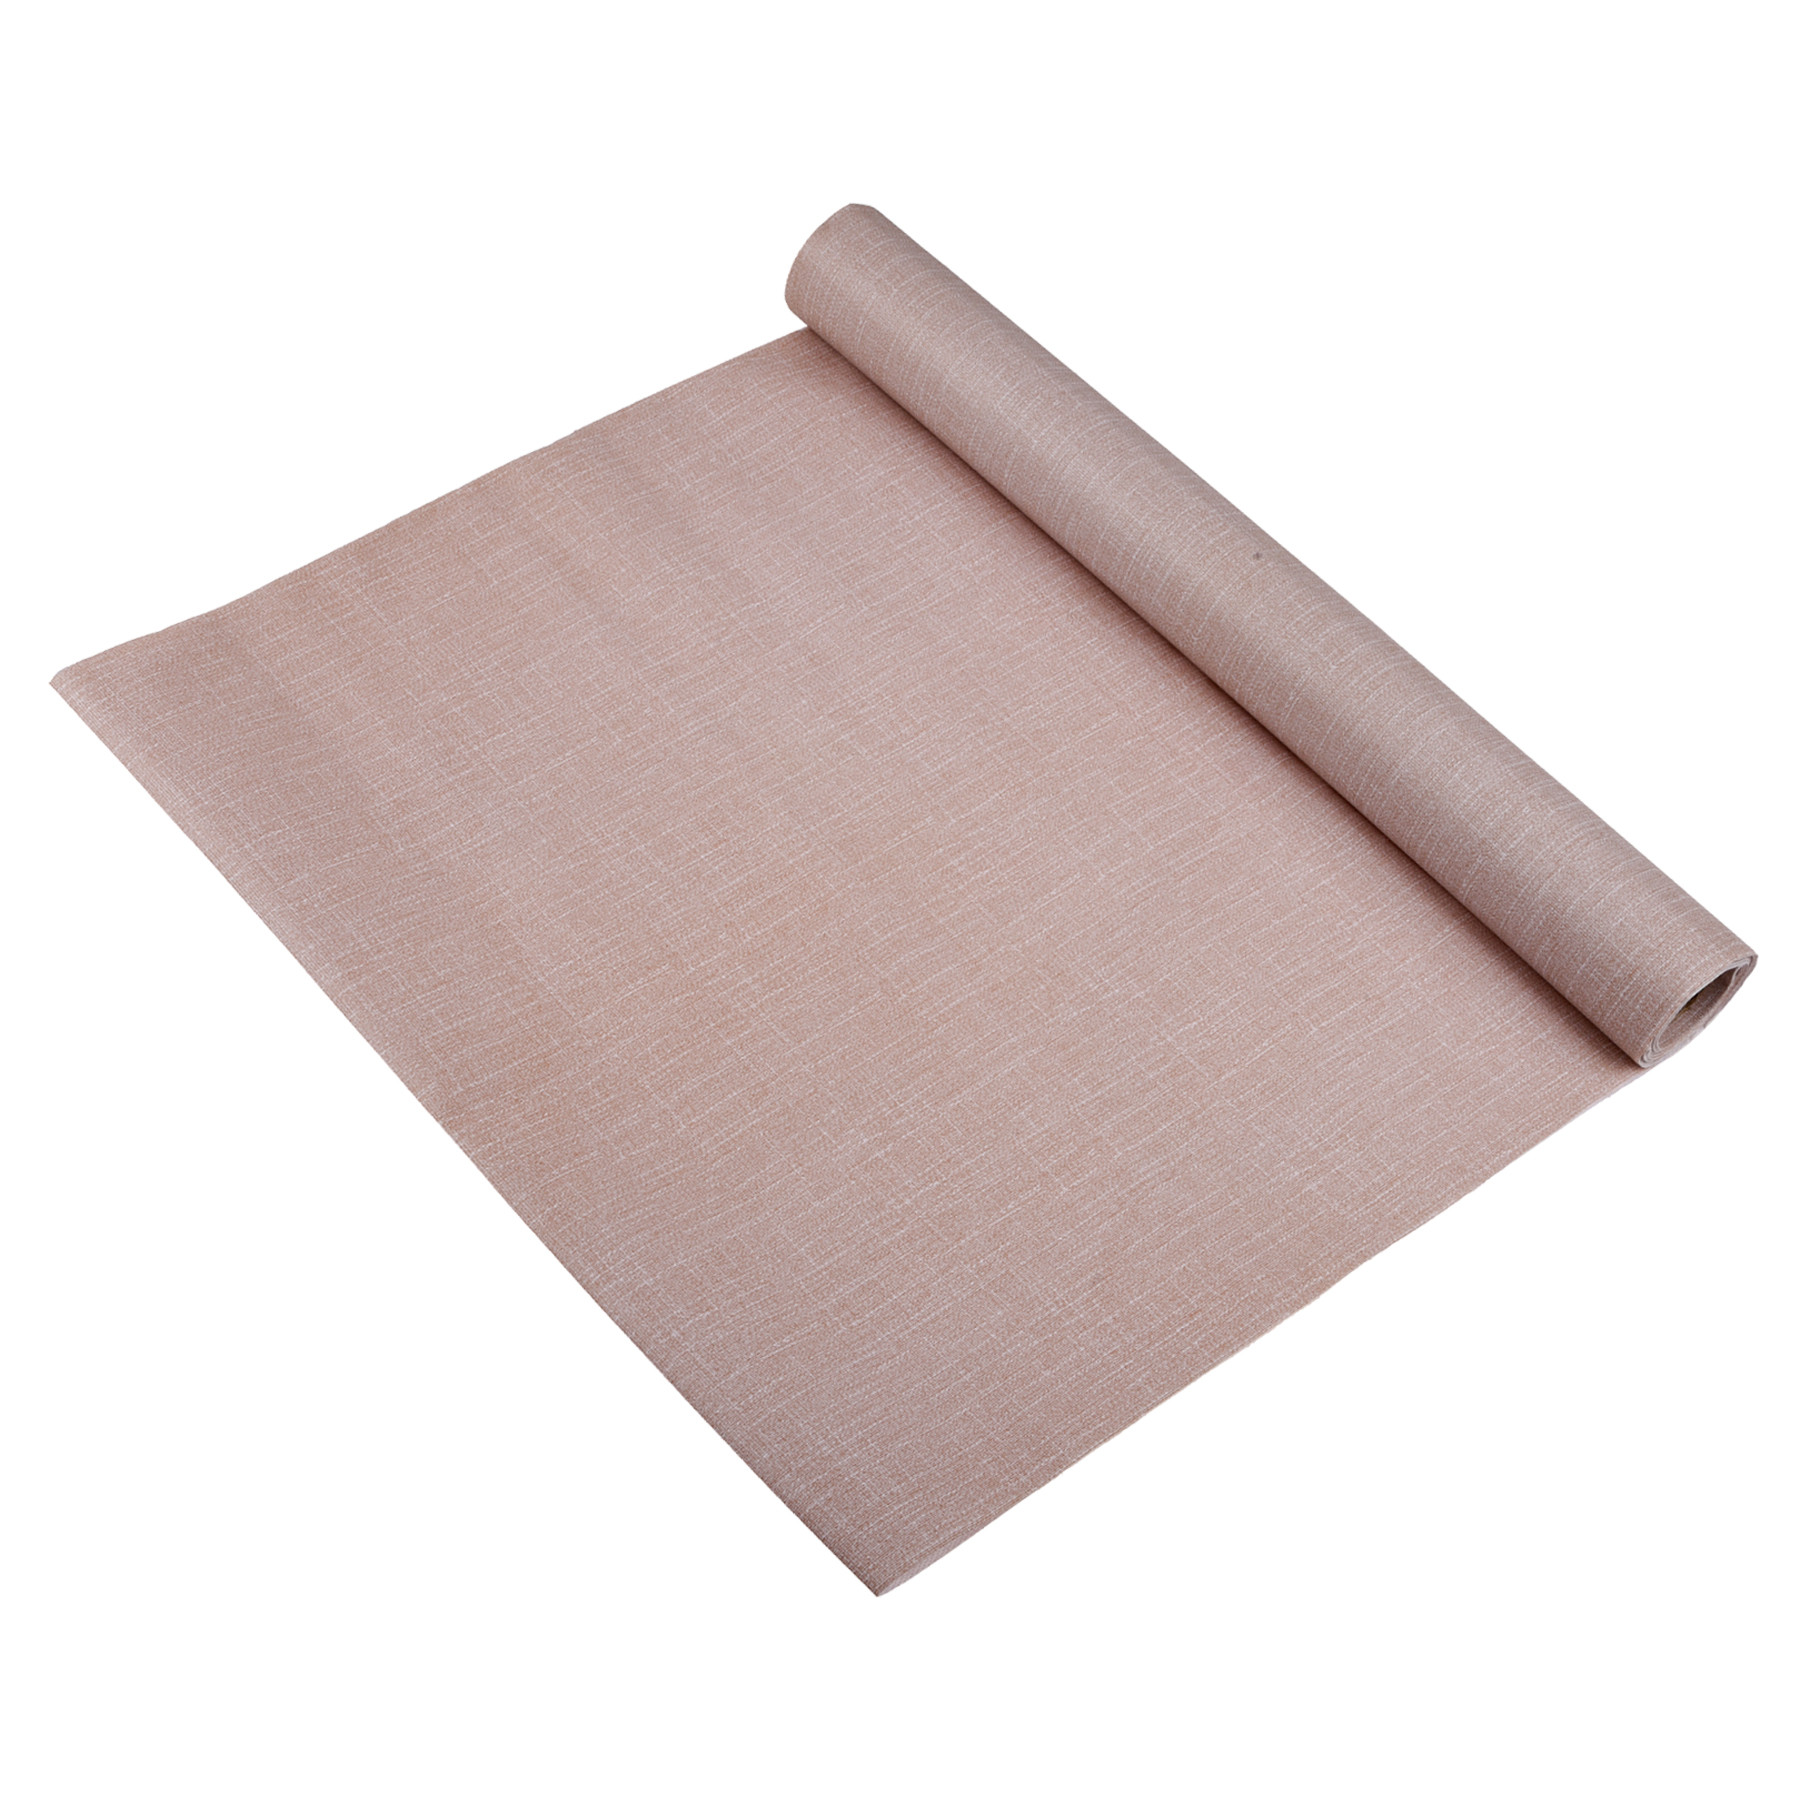 Kuber Industries Shelf Liner | Kitchen Cabinet Shelf Protector | Kitchen Liners for Cabinets and Drawers | Drawer Liner Mat | Texture Shelf Liner Cabinet Mat | 5 MTR | Beige